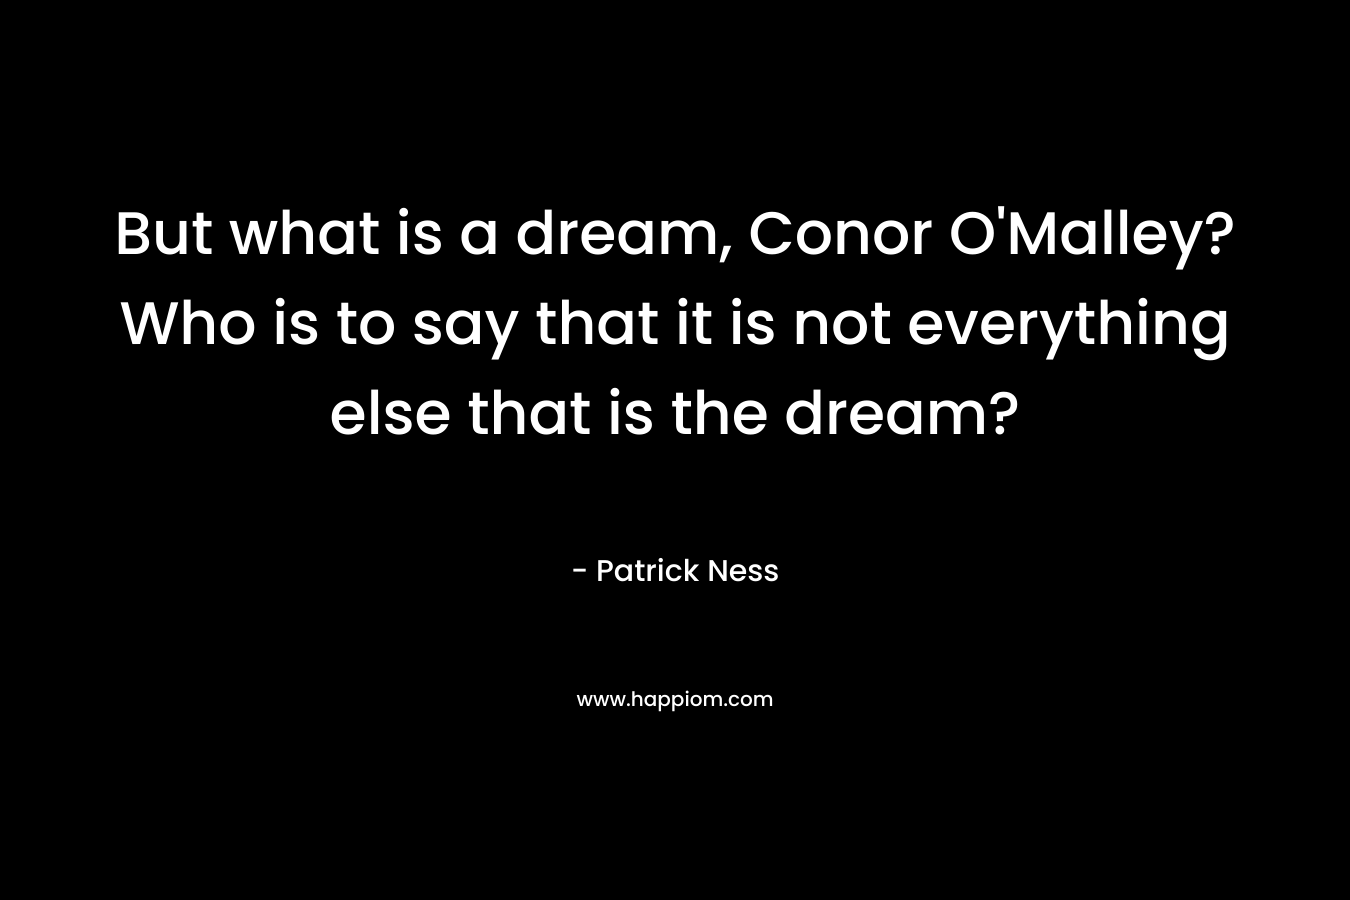 But what is a dream, Conor O'Malley? Who is to say that it is not everything else that is the dream?